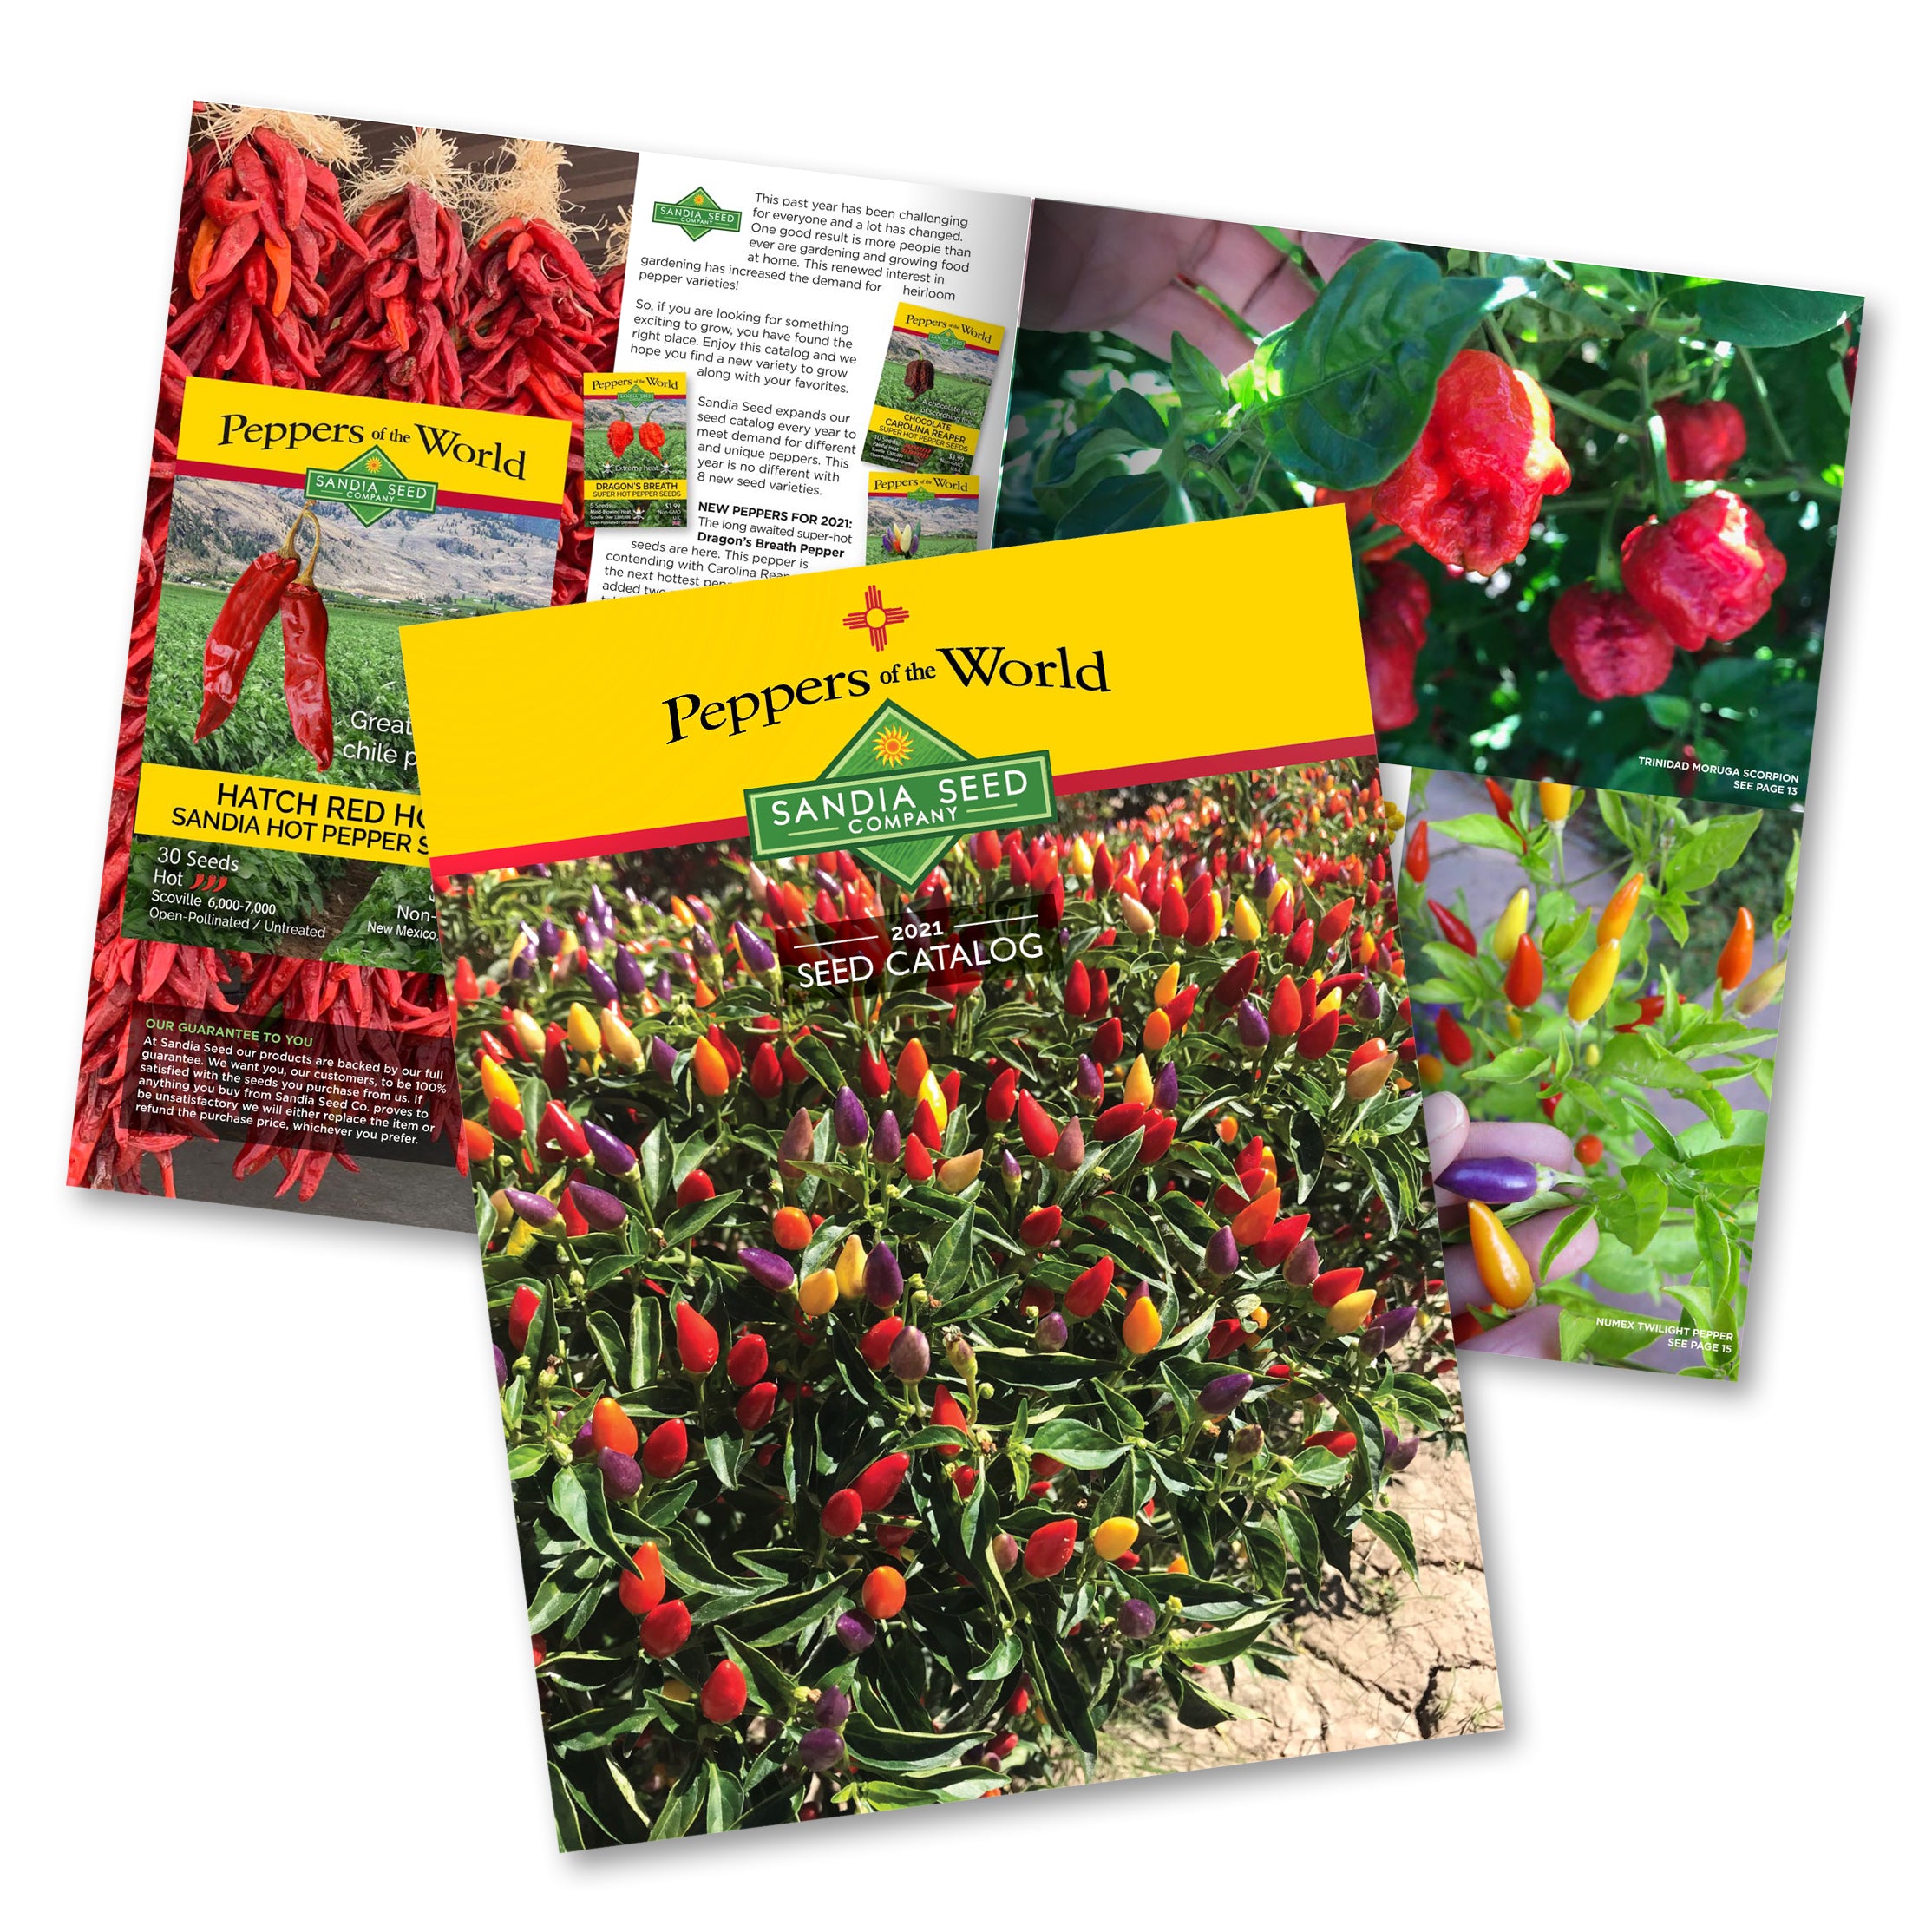 Seed Catalog from Sandia Seed